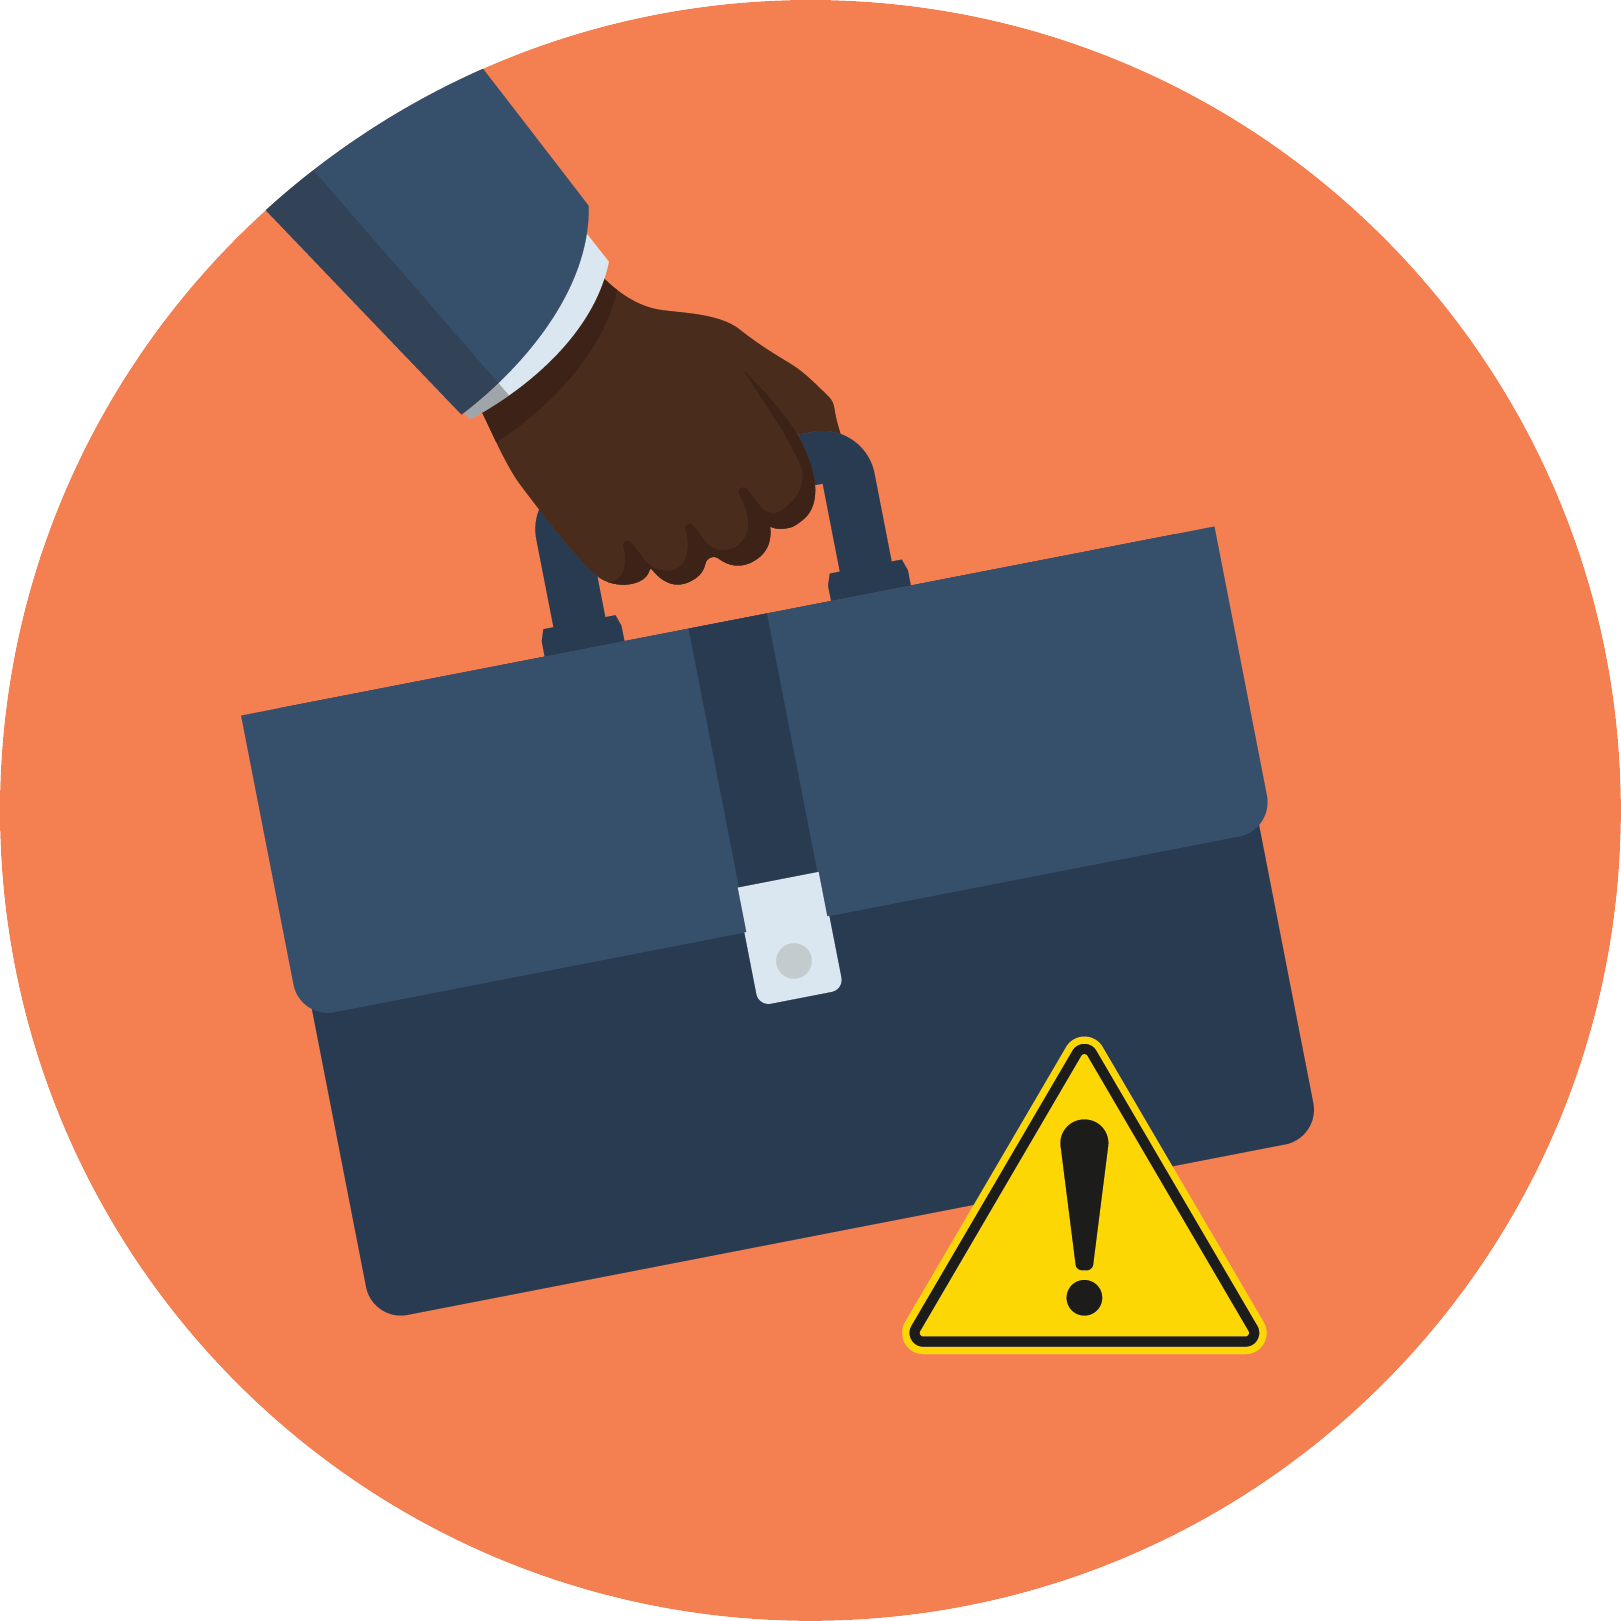 Holding a suitcase icon